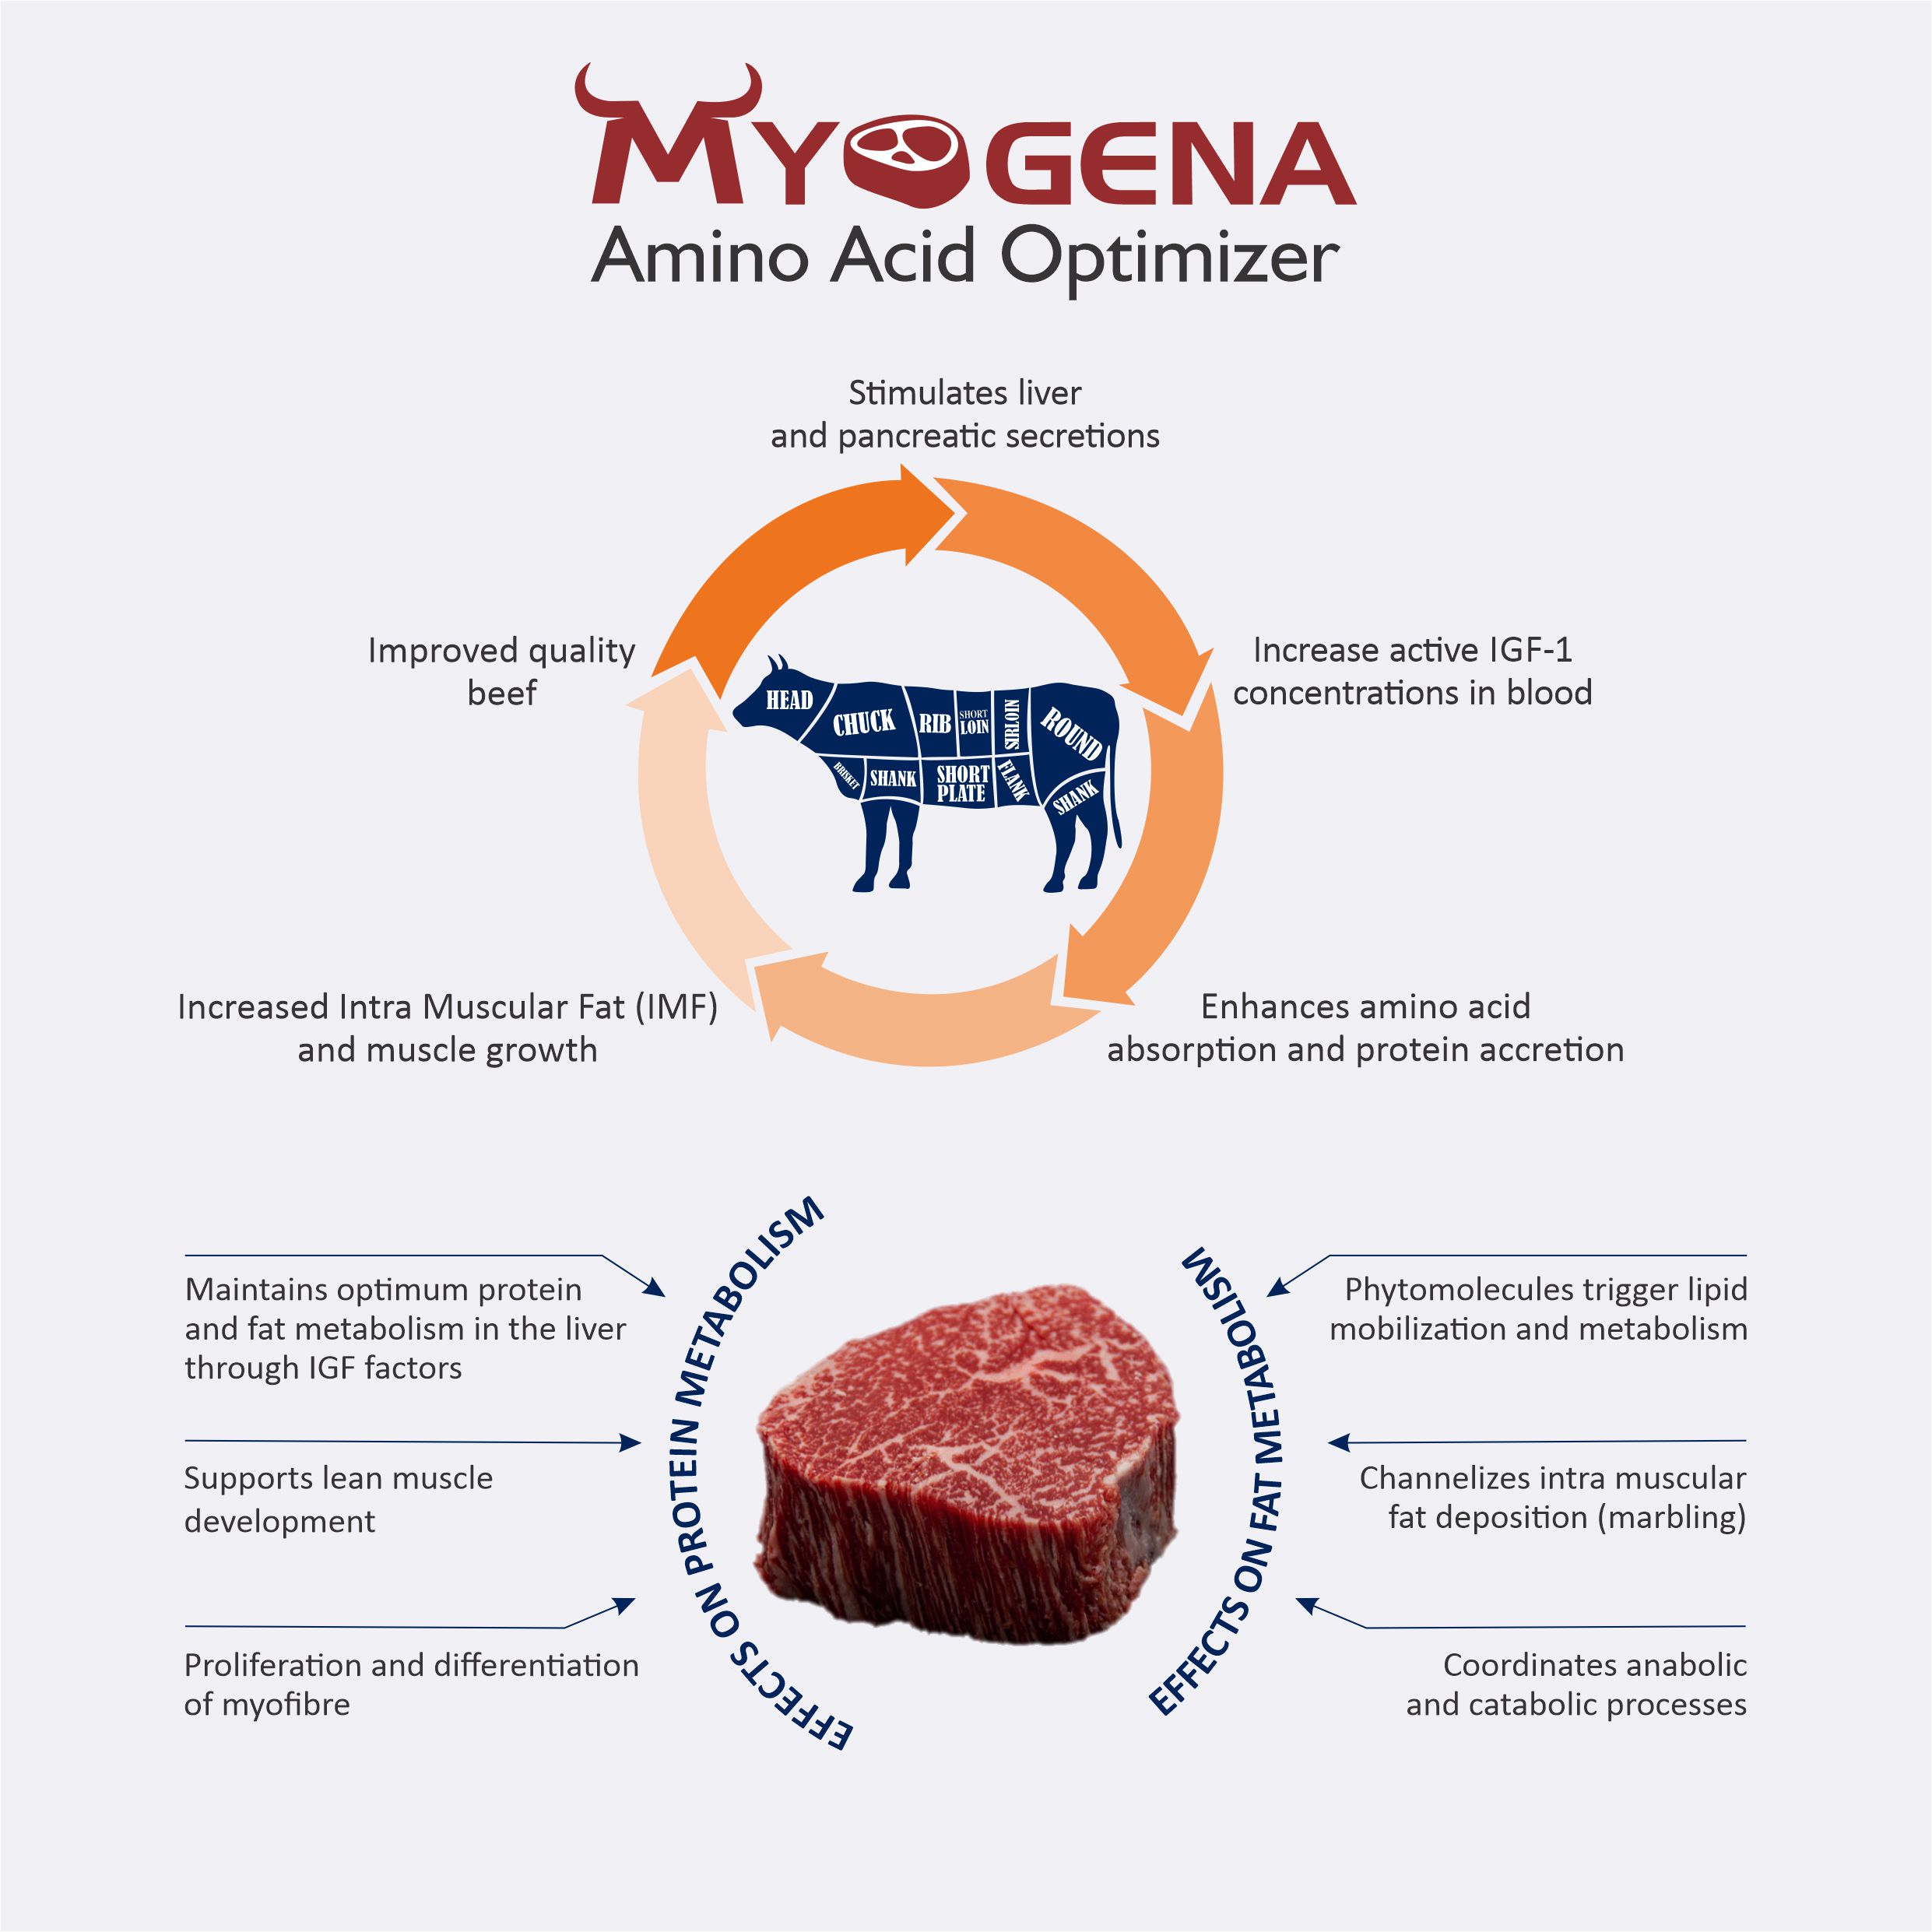 MYOGENA - an Image of MOA, Mechanism of action- Improve FCR and weight in beef cattle - Natural Growth Promoter in cattle farming - Amino acid optimizer for rumen